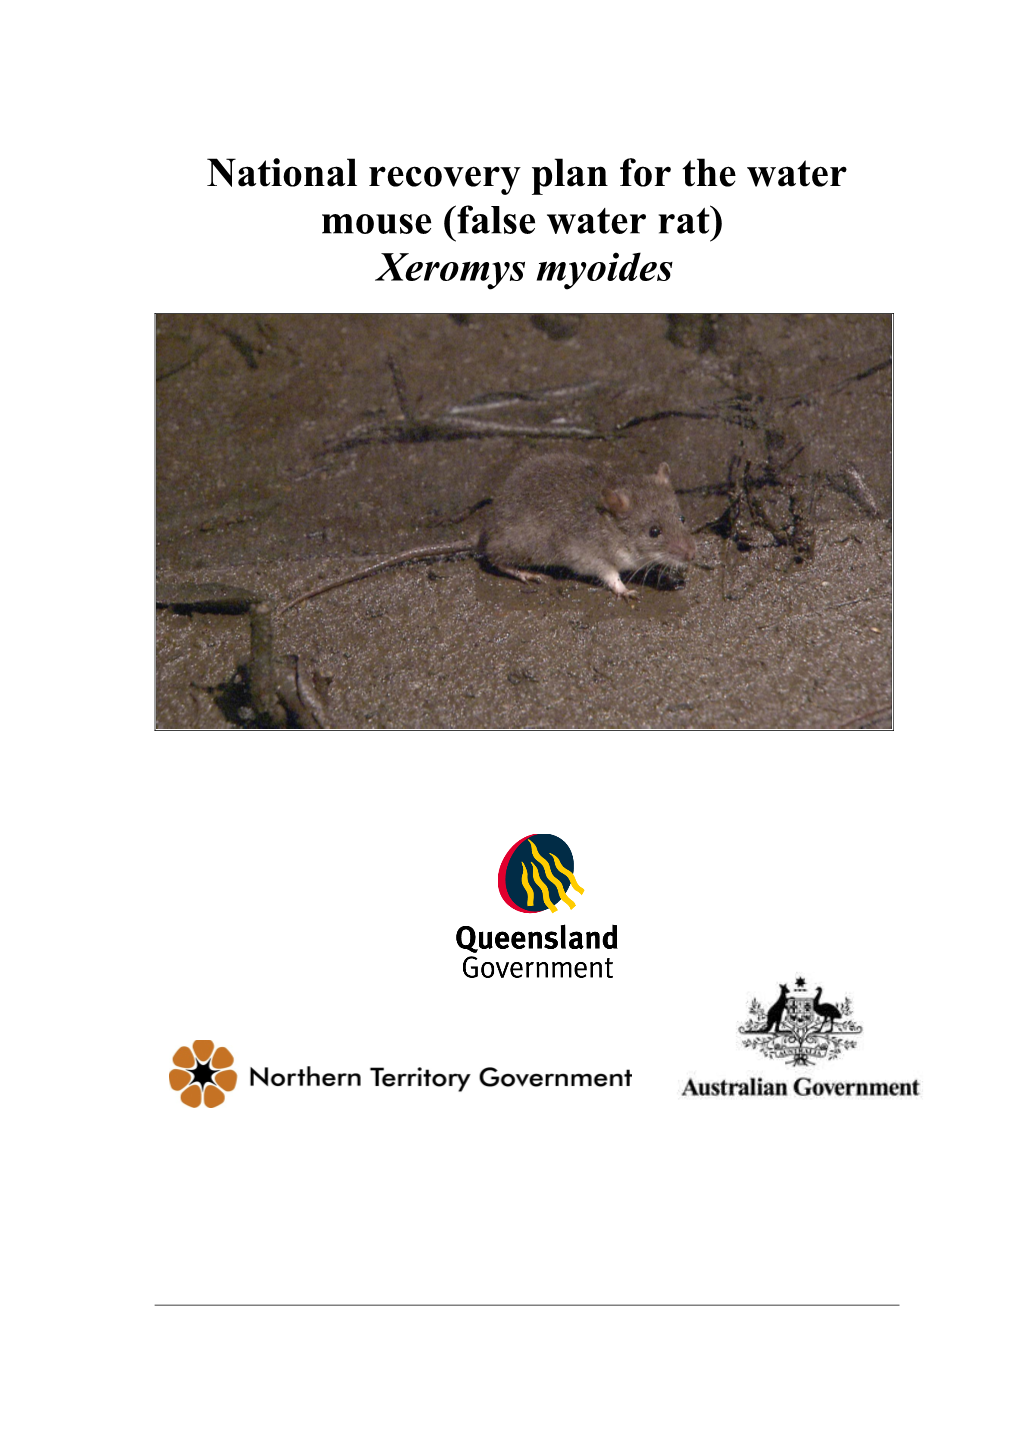 National Recovery Plan for the Water Mouse (False Water Rat) Xeromys Myoides